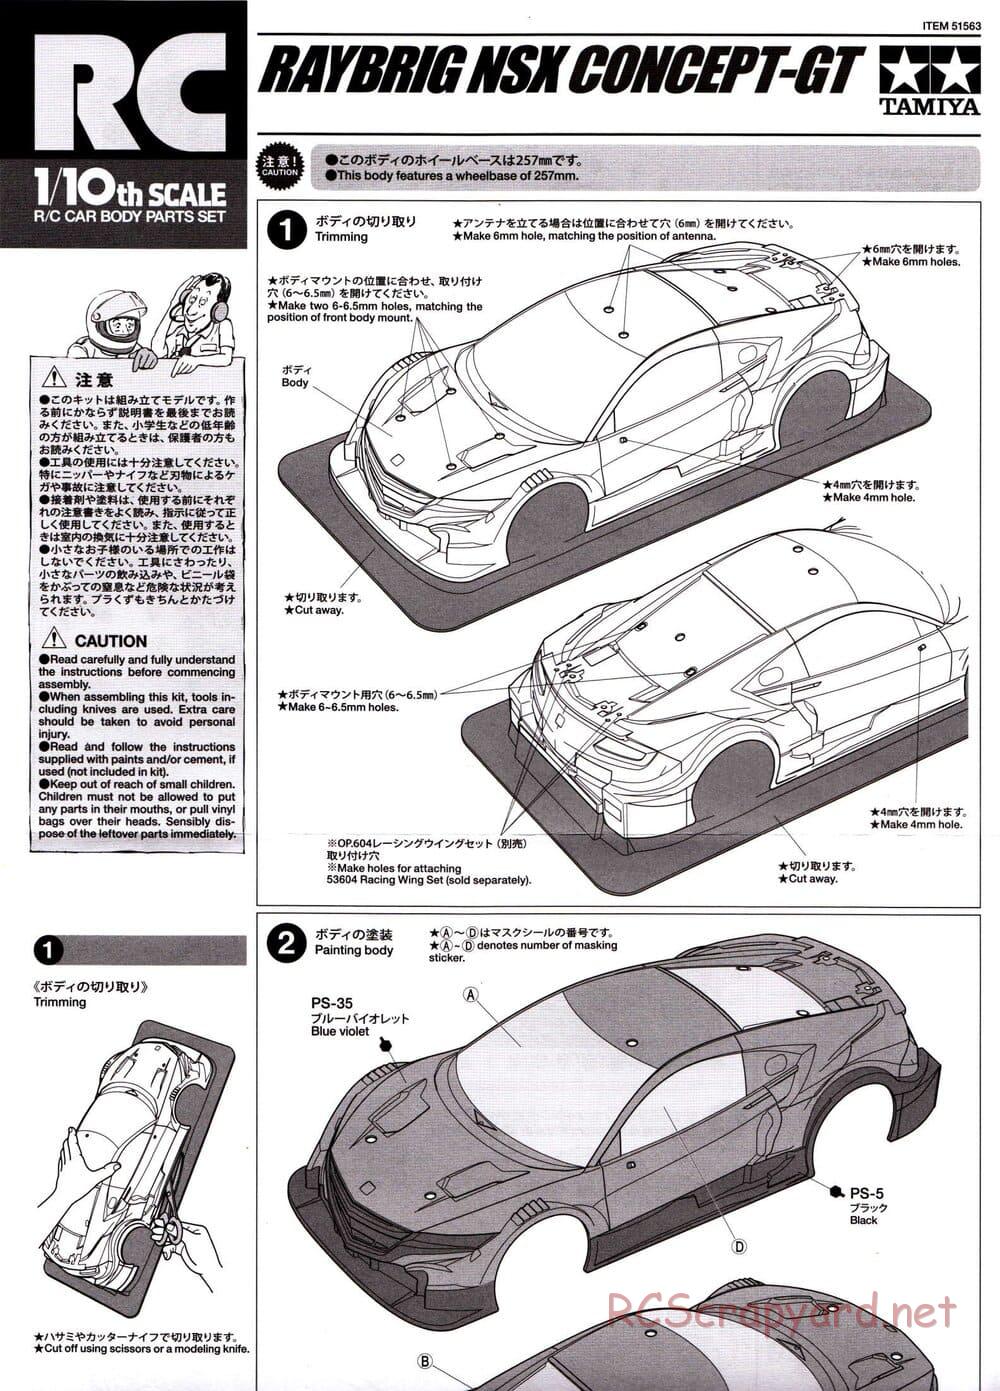 Tamiya - Raybrig NSX Concept GT - TB-04 Chassis - Body Manual - Page 1